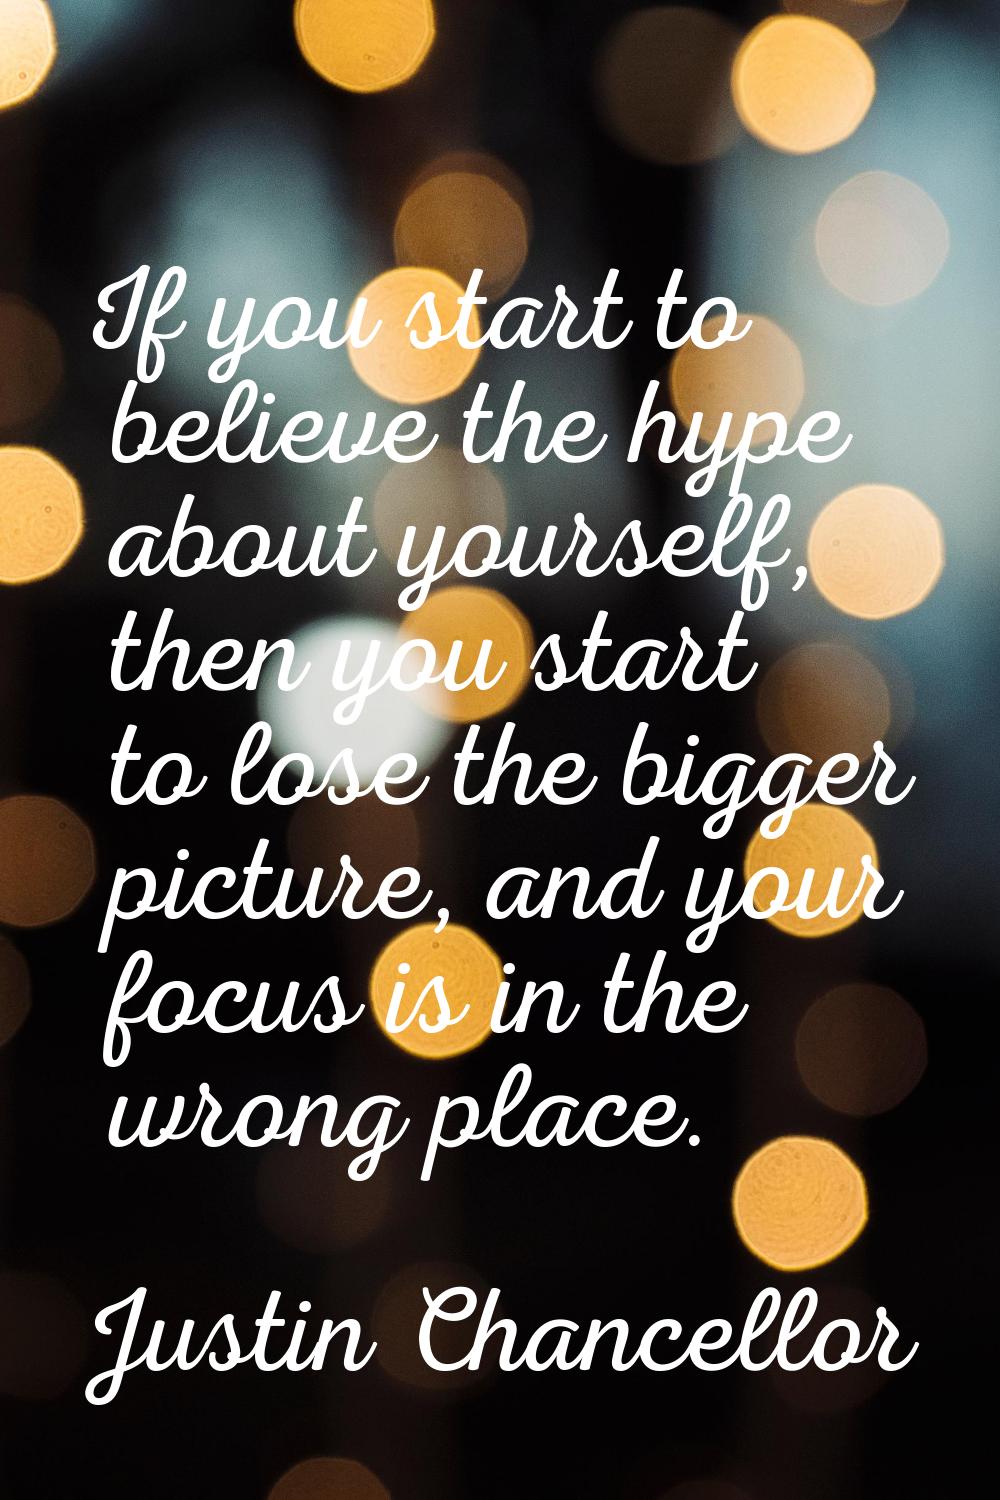 If you start to believe the hype about yourself, then you start to lose the bigger picture, and you